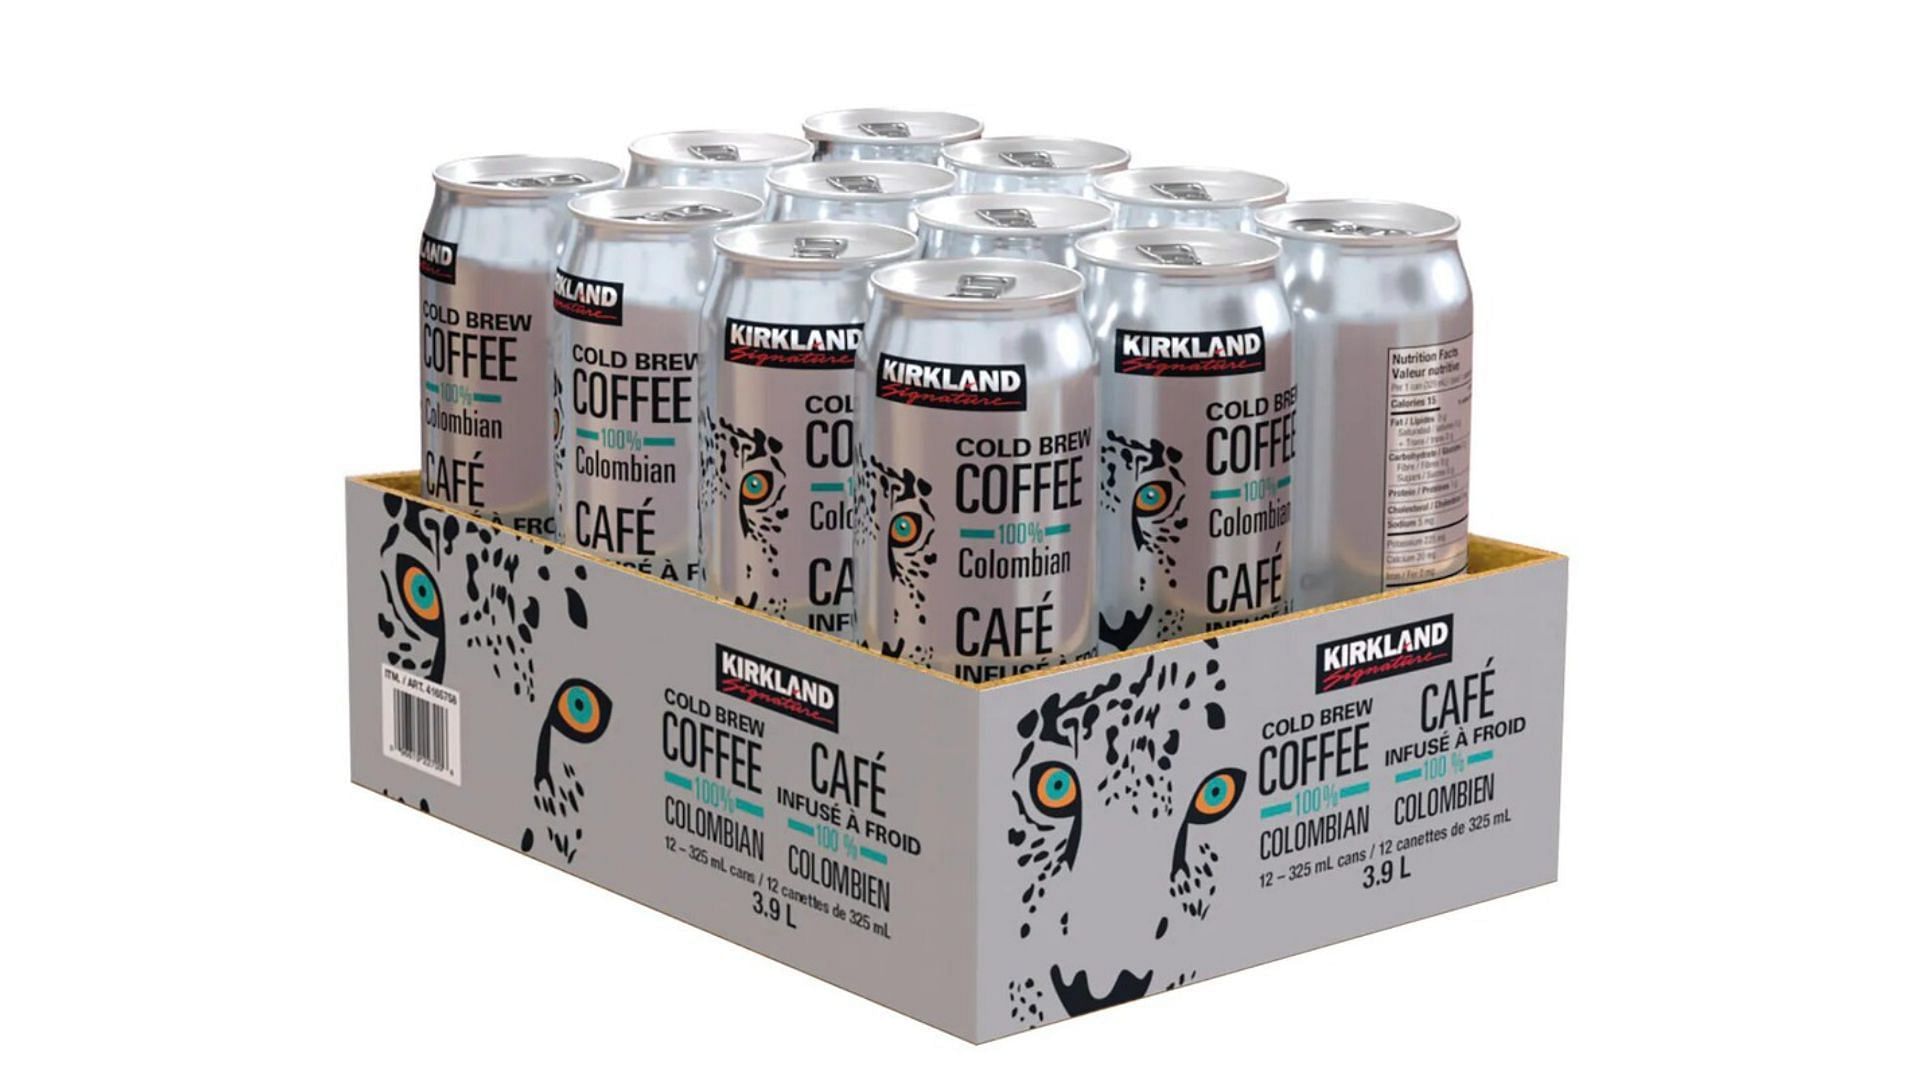 the recalled Kirkland Signature Cold Brew, which is available in stores all across the country, could potentially be contaminated with foreign particles and could have a bolt in the can (Image via Costco)